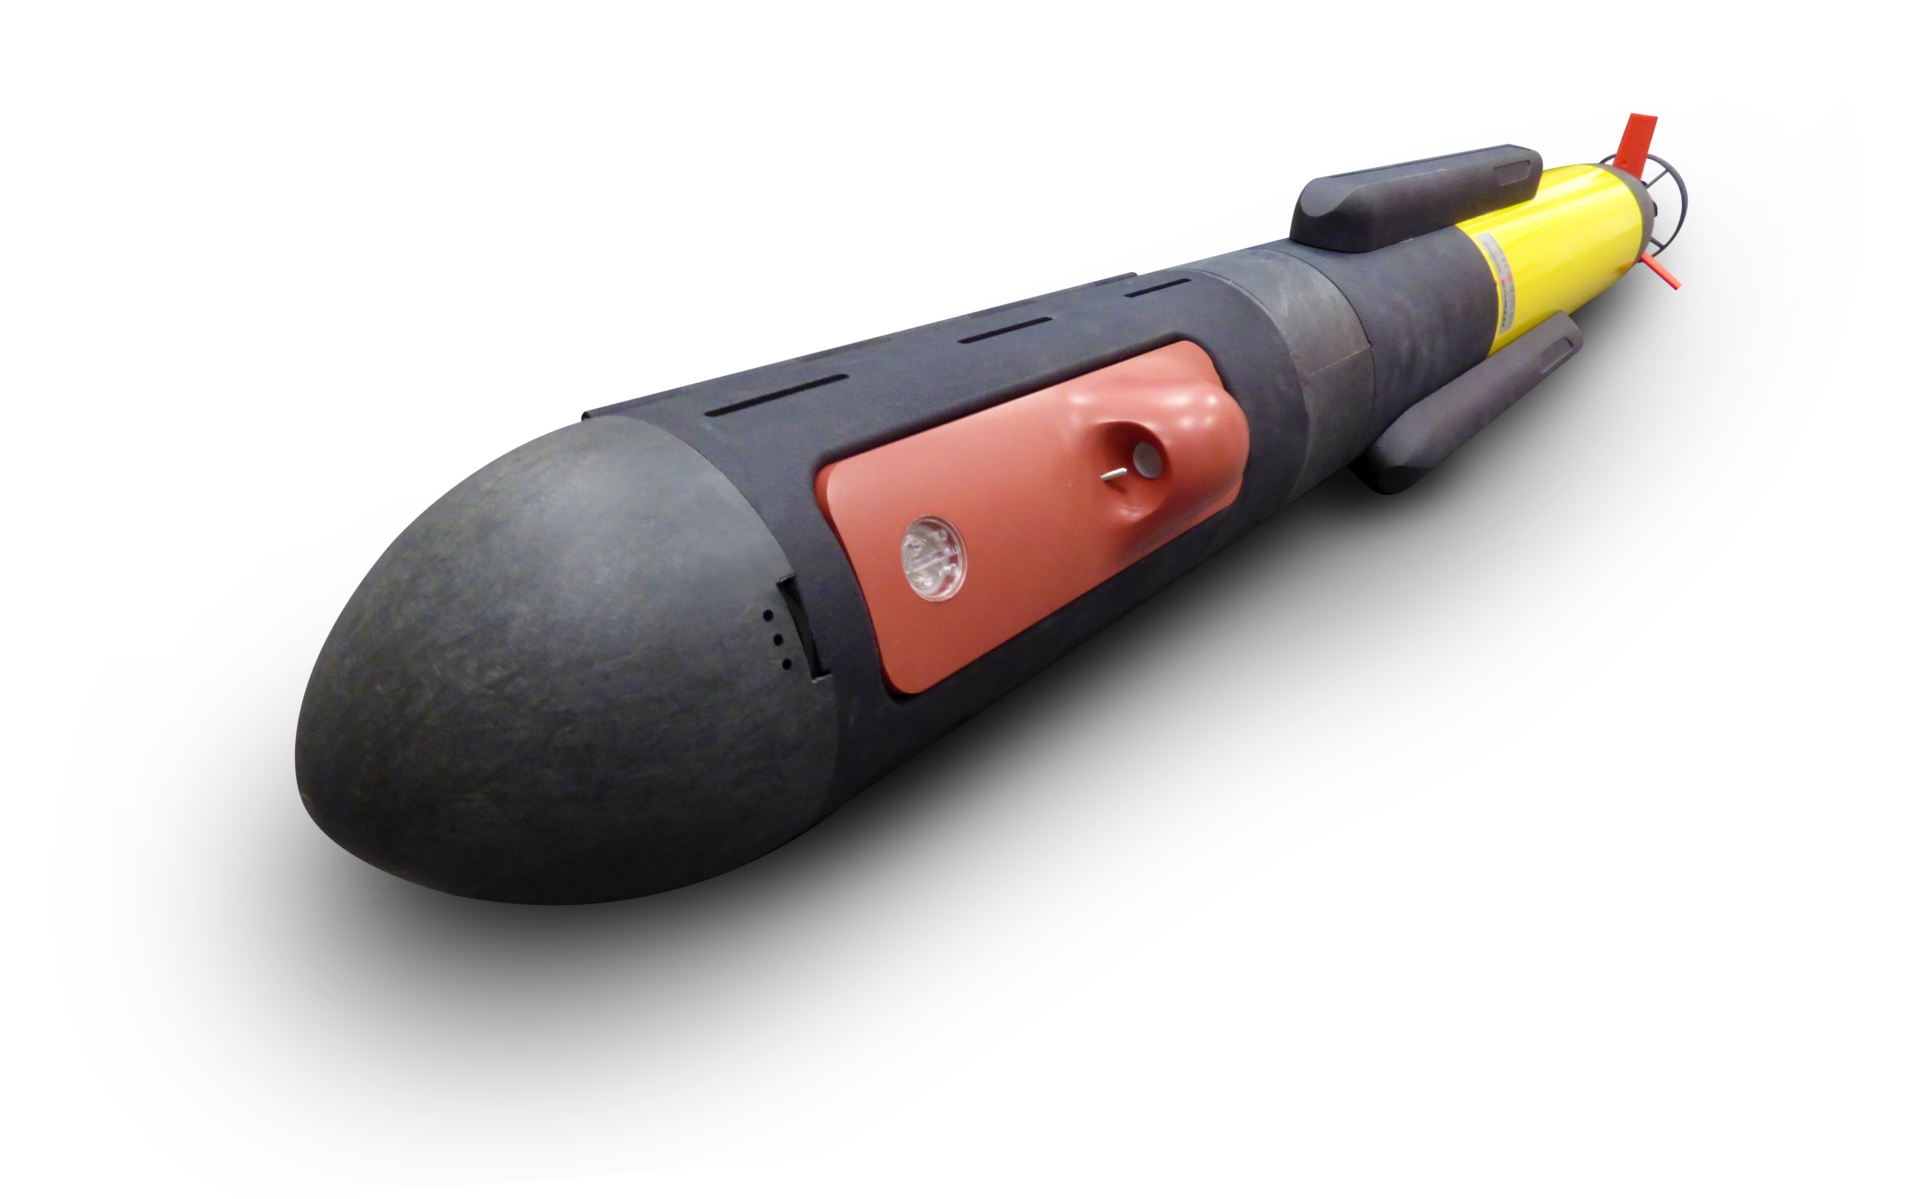 The RBRlegato3 C.T.D mounted on the NemoSens AUV.